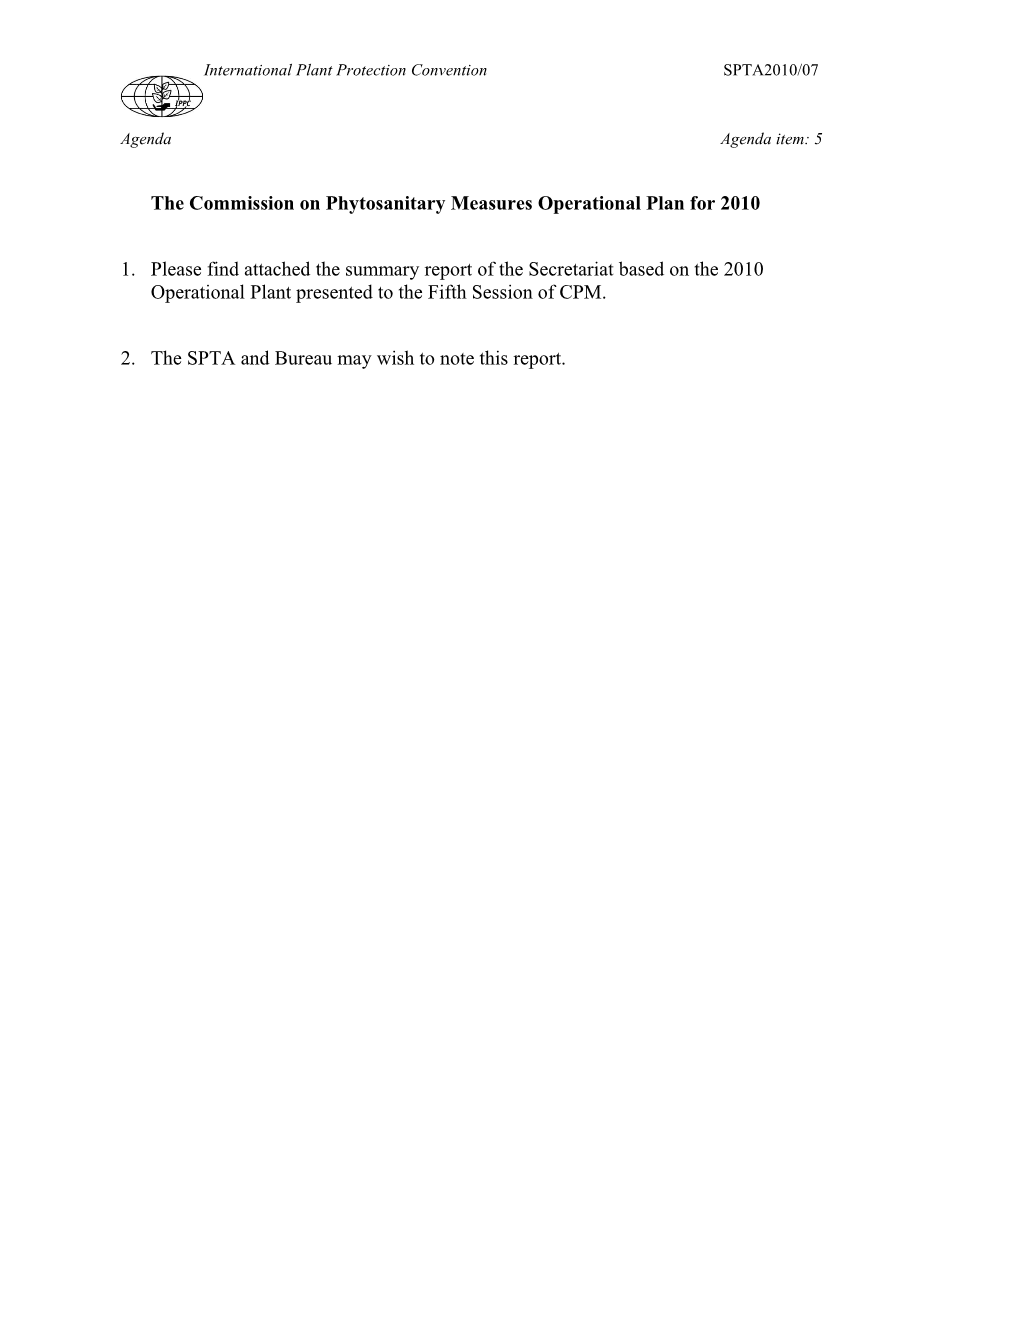 The Commission on Phytosanitary Measures Operational Plan for 2010